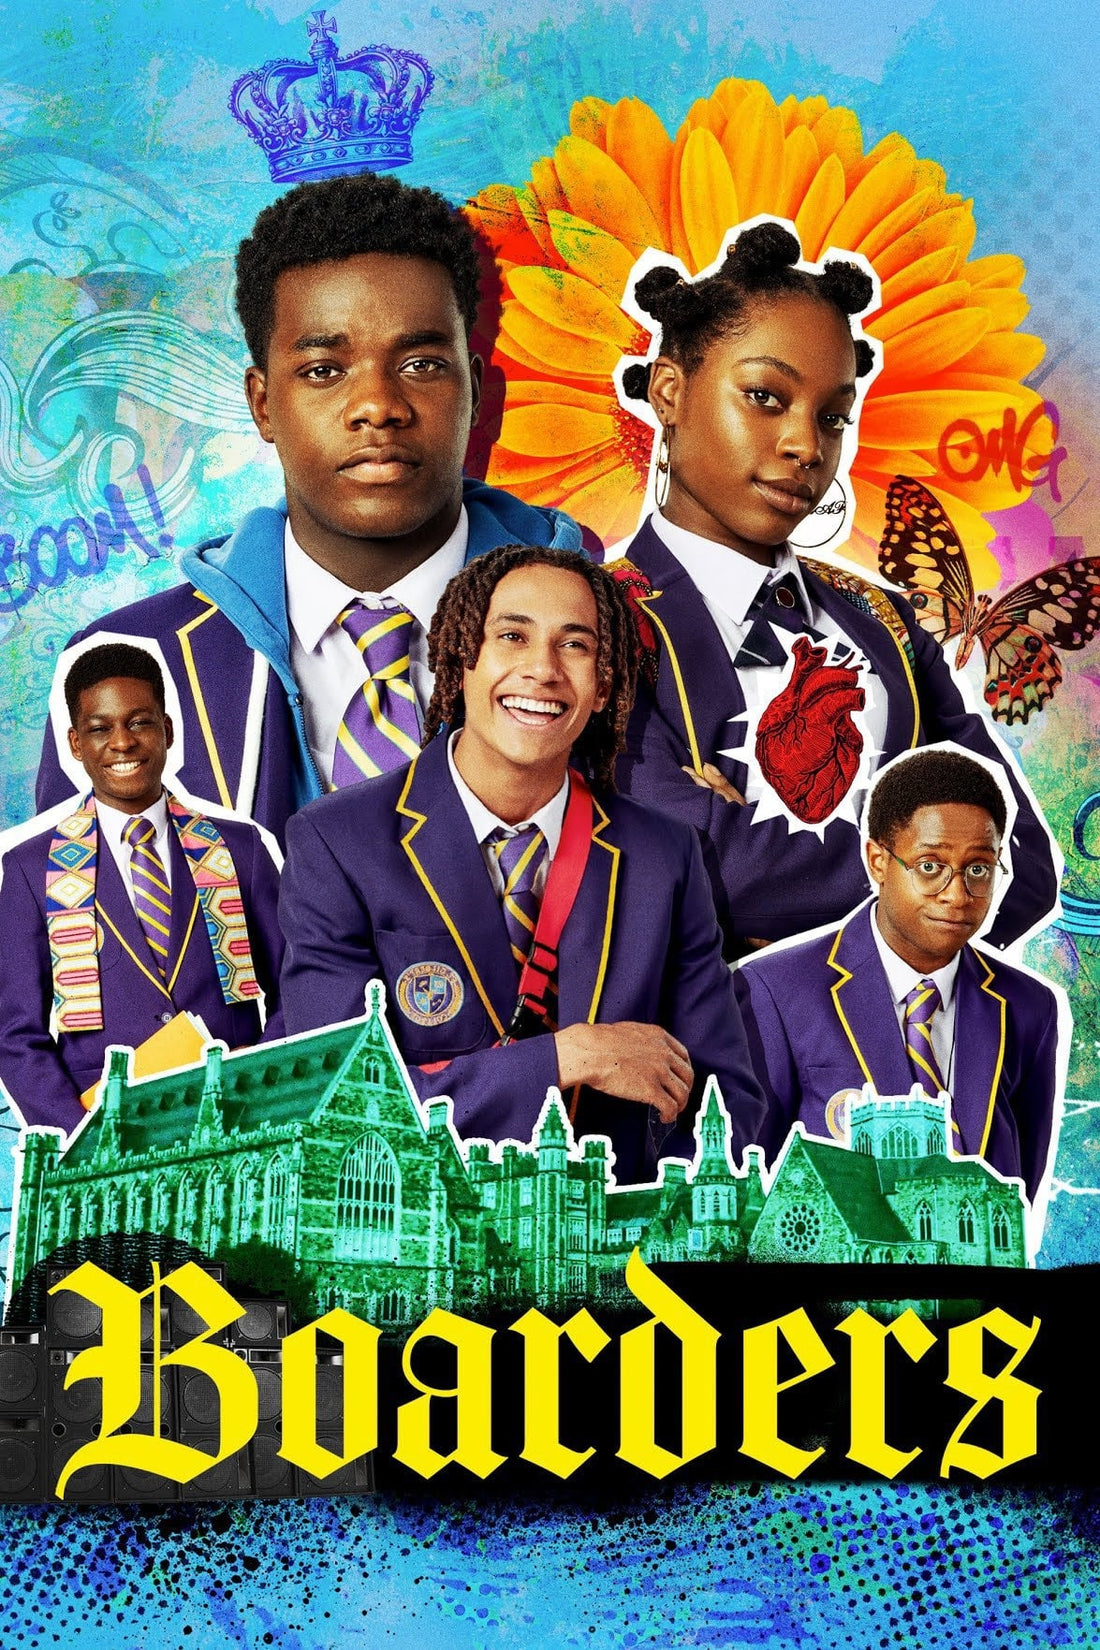 Cast and where to watch Boarders